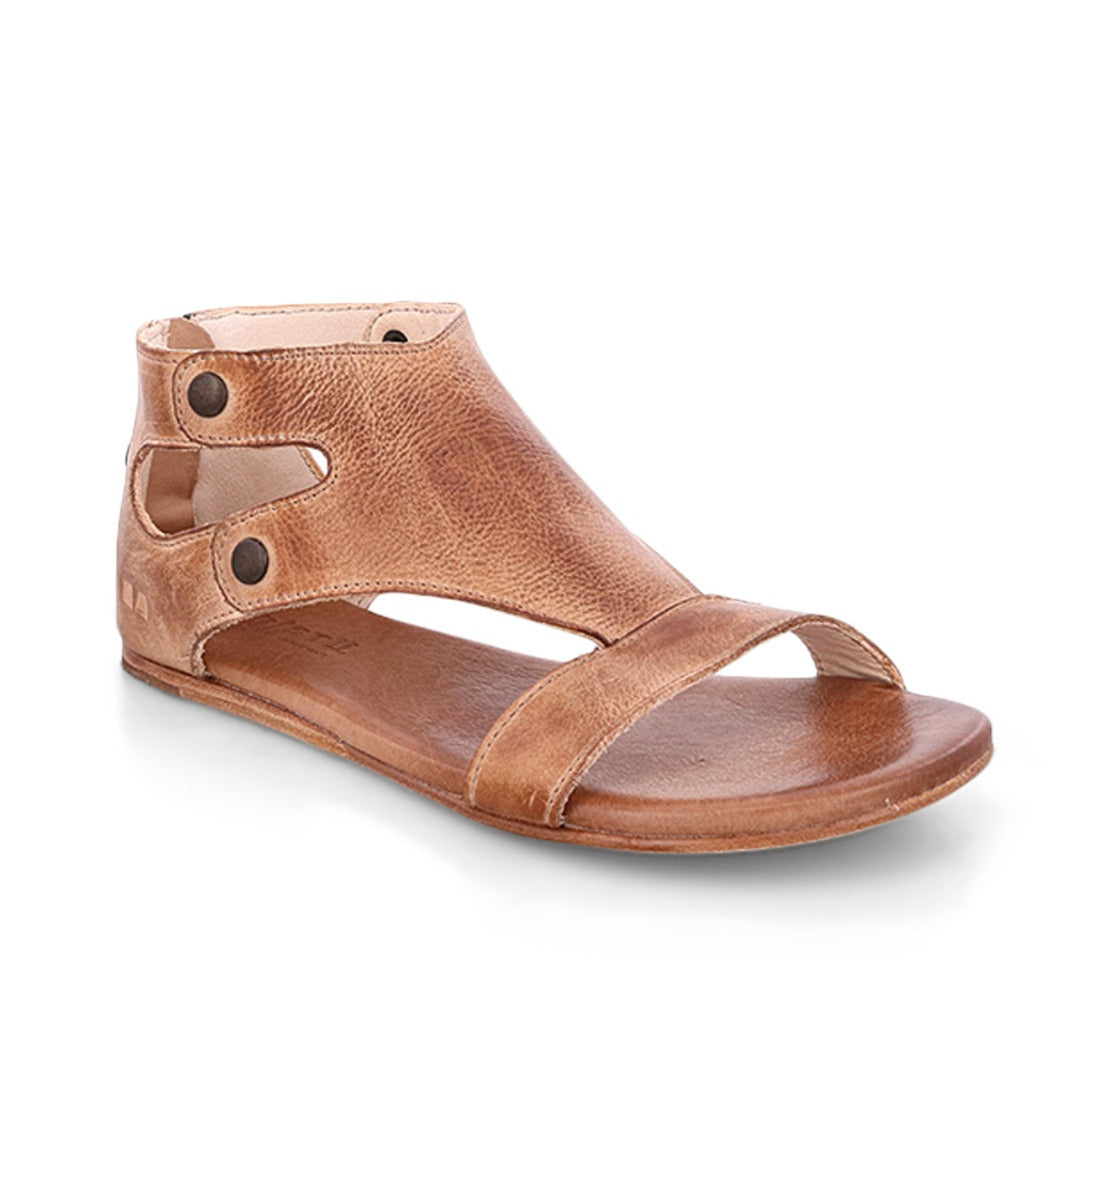 Women's tan leather Soto sandals by Bed Stu.